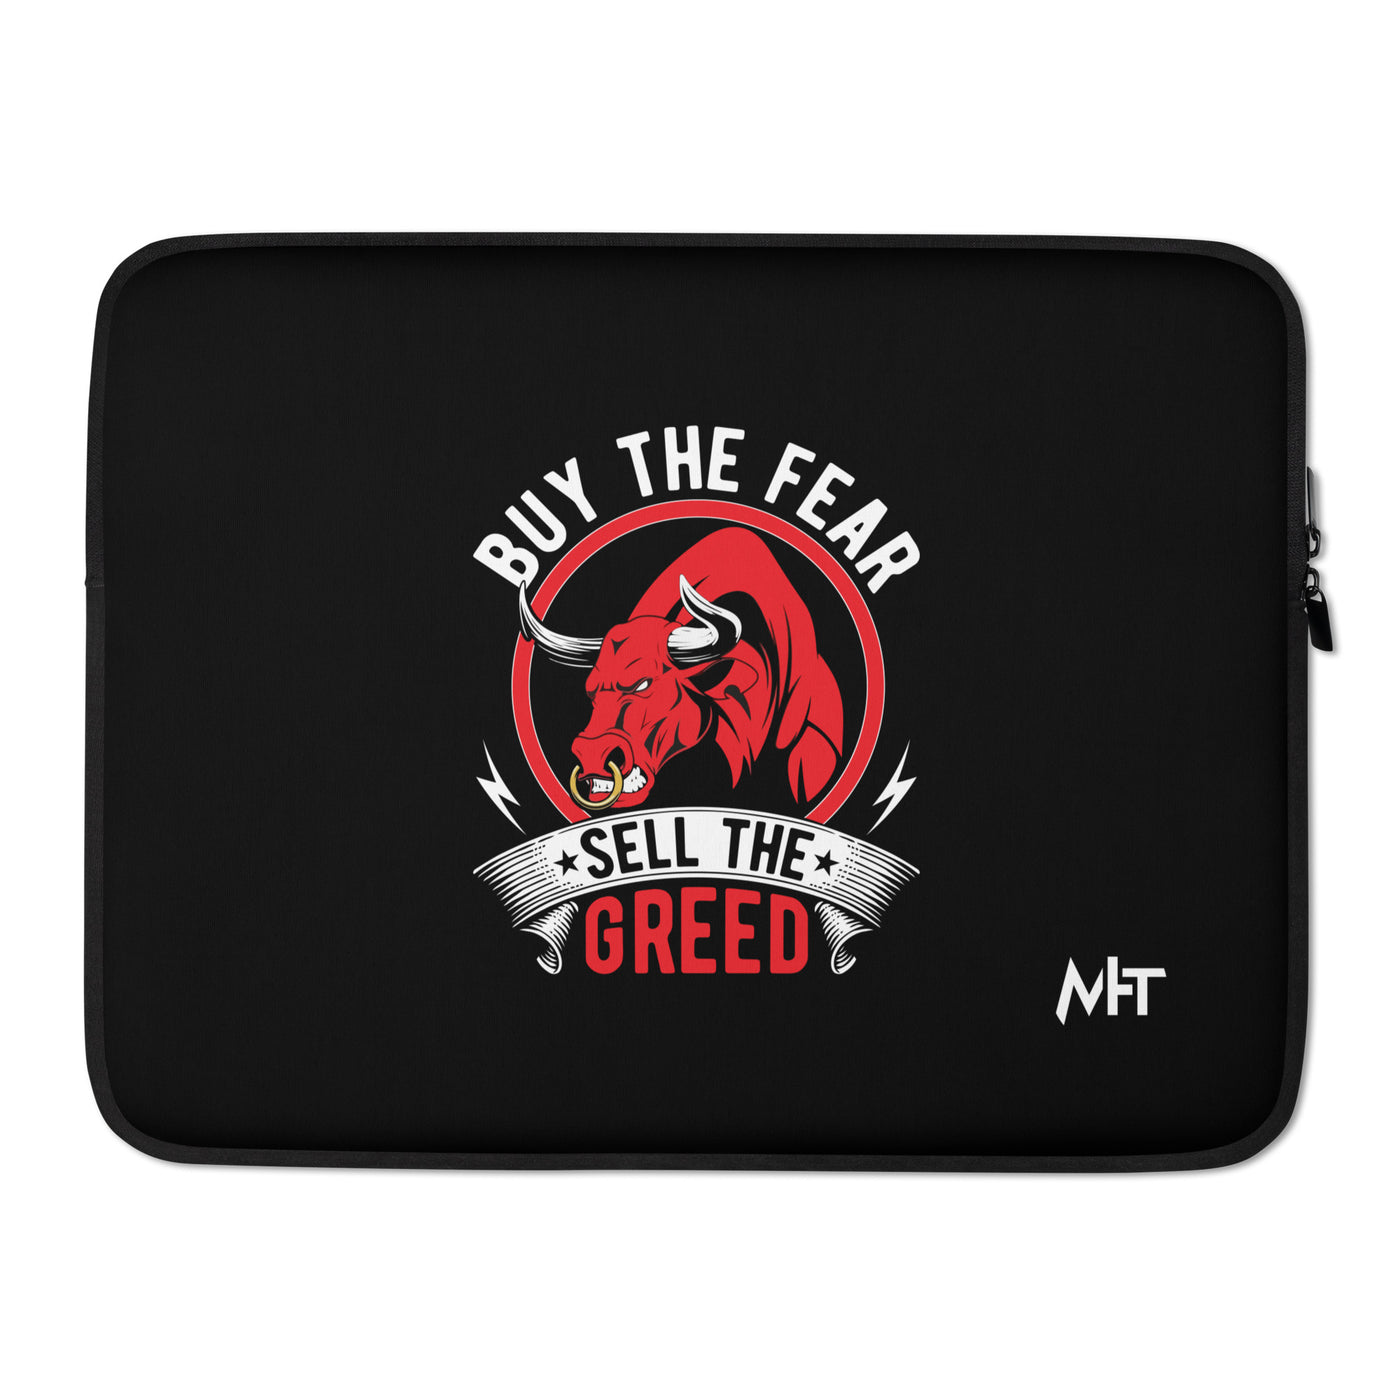 Buy the Fear; Sell the Greed - Laptop Sleeve